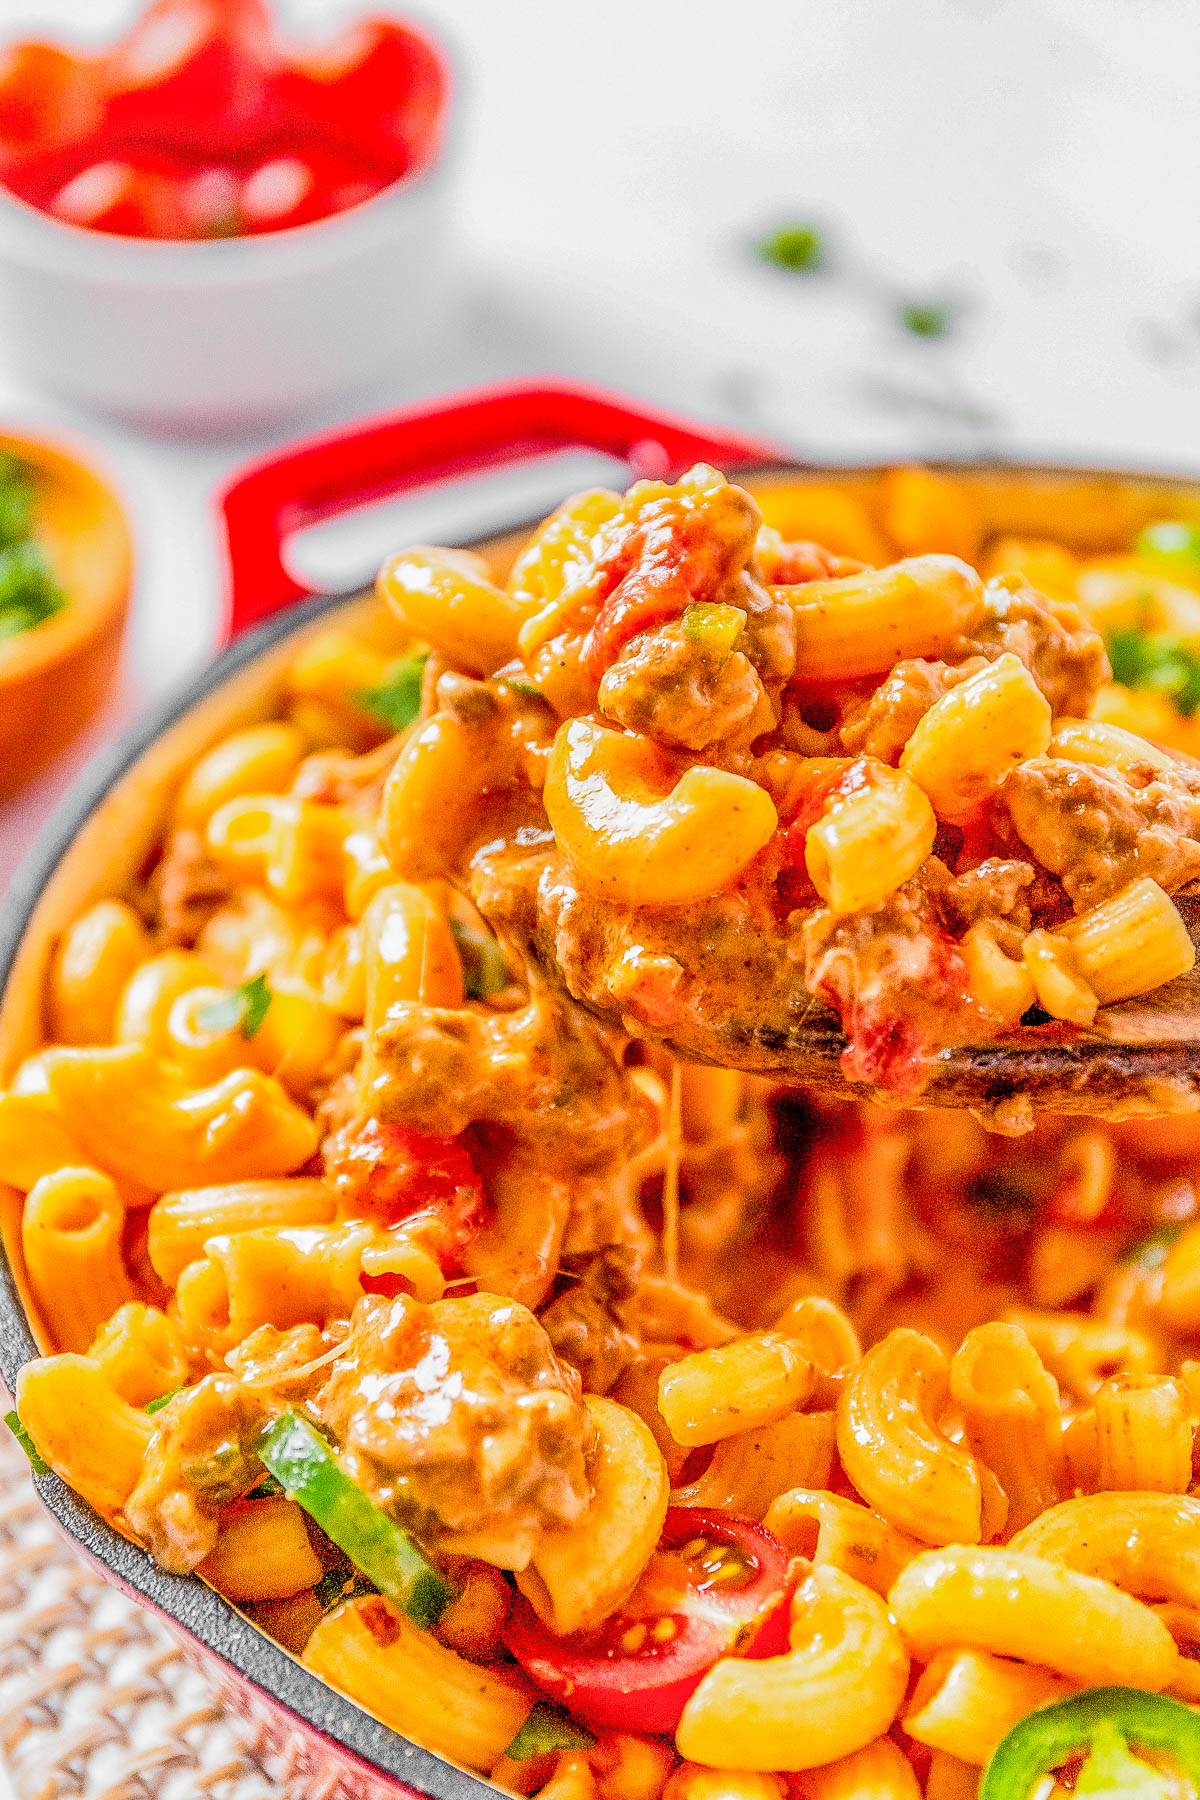 A vibrant dish of cheesy macaroni with tomatoes and minced meat in a red skillet, served on a white speckled surface.